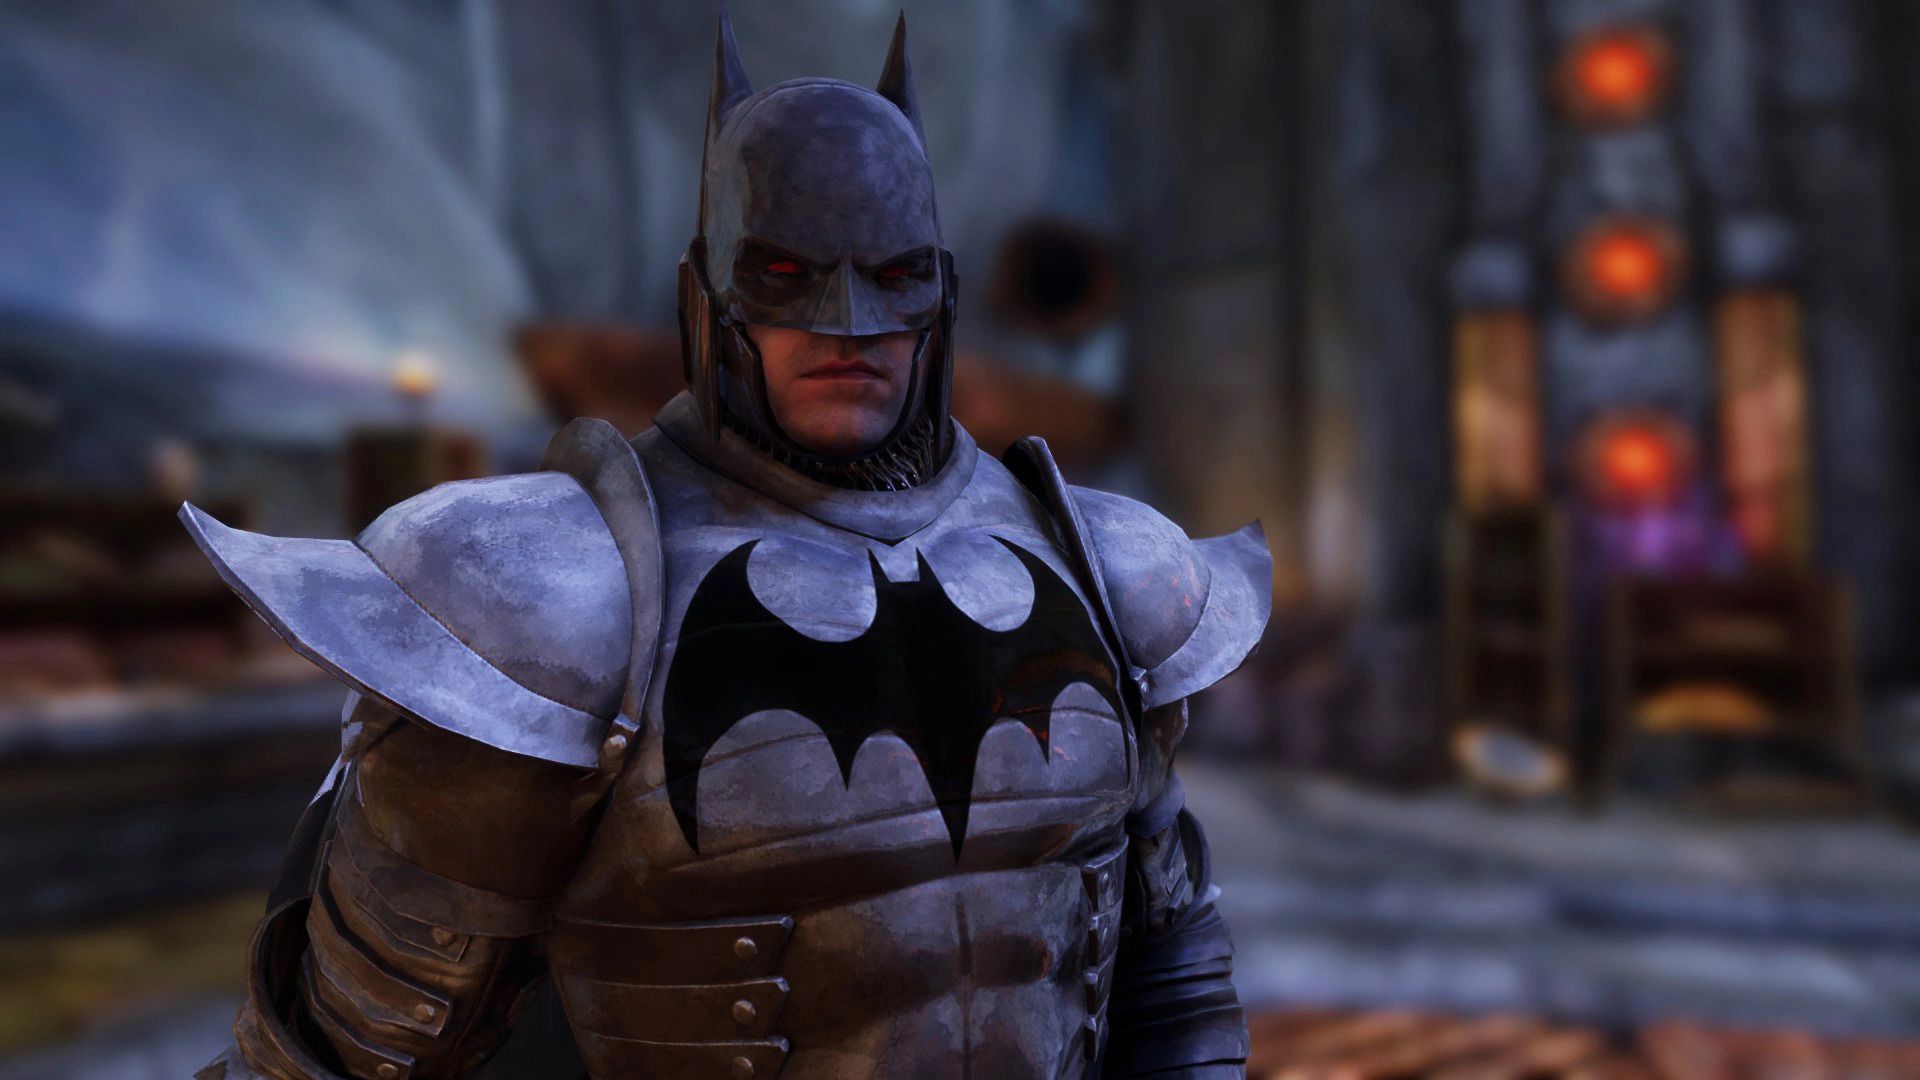 Batman mod for Skyrim featuring a character resembling actor Ben Affleck wearing a heavy suit of armor with a hood